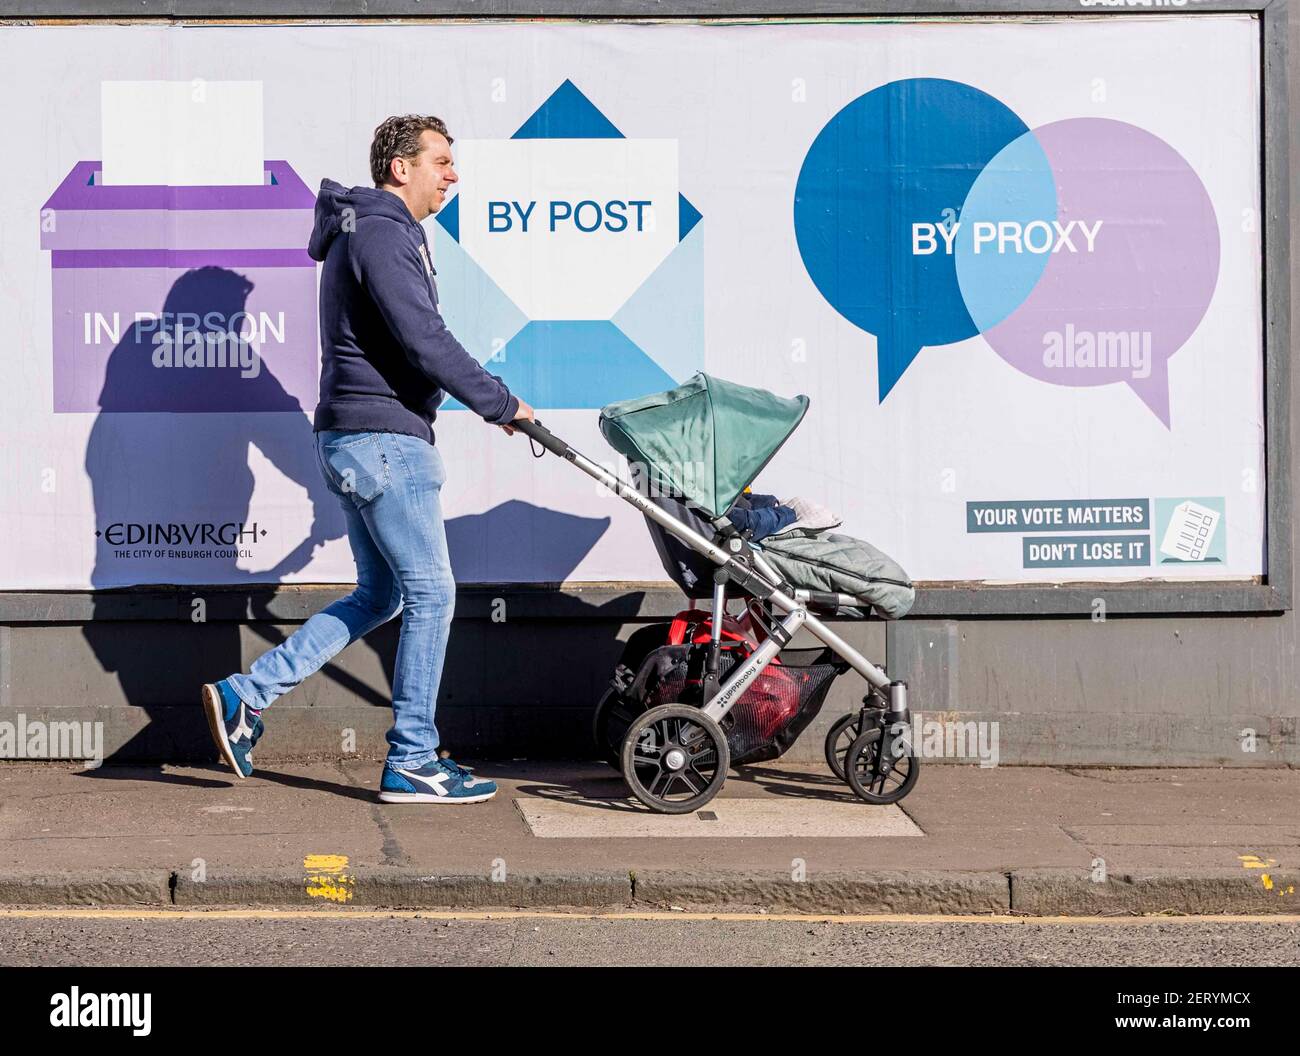 Edinburgh, United Kingdom . 01 March, 2021 Pictured: The Scottish Government will make a ministerial statement to the Scottish Parliament tomorrow on the forthcoming Scottish Parliamentary Elections. An advertising campaign shows the different ways to vote in the election. Credit: Rich Dyson/Alamy Live News Stock Photo